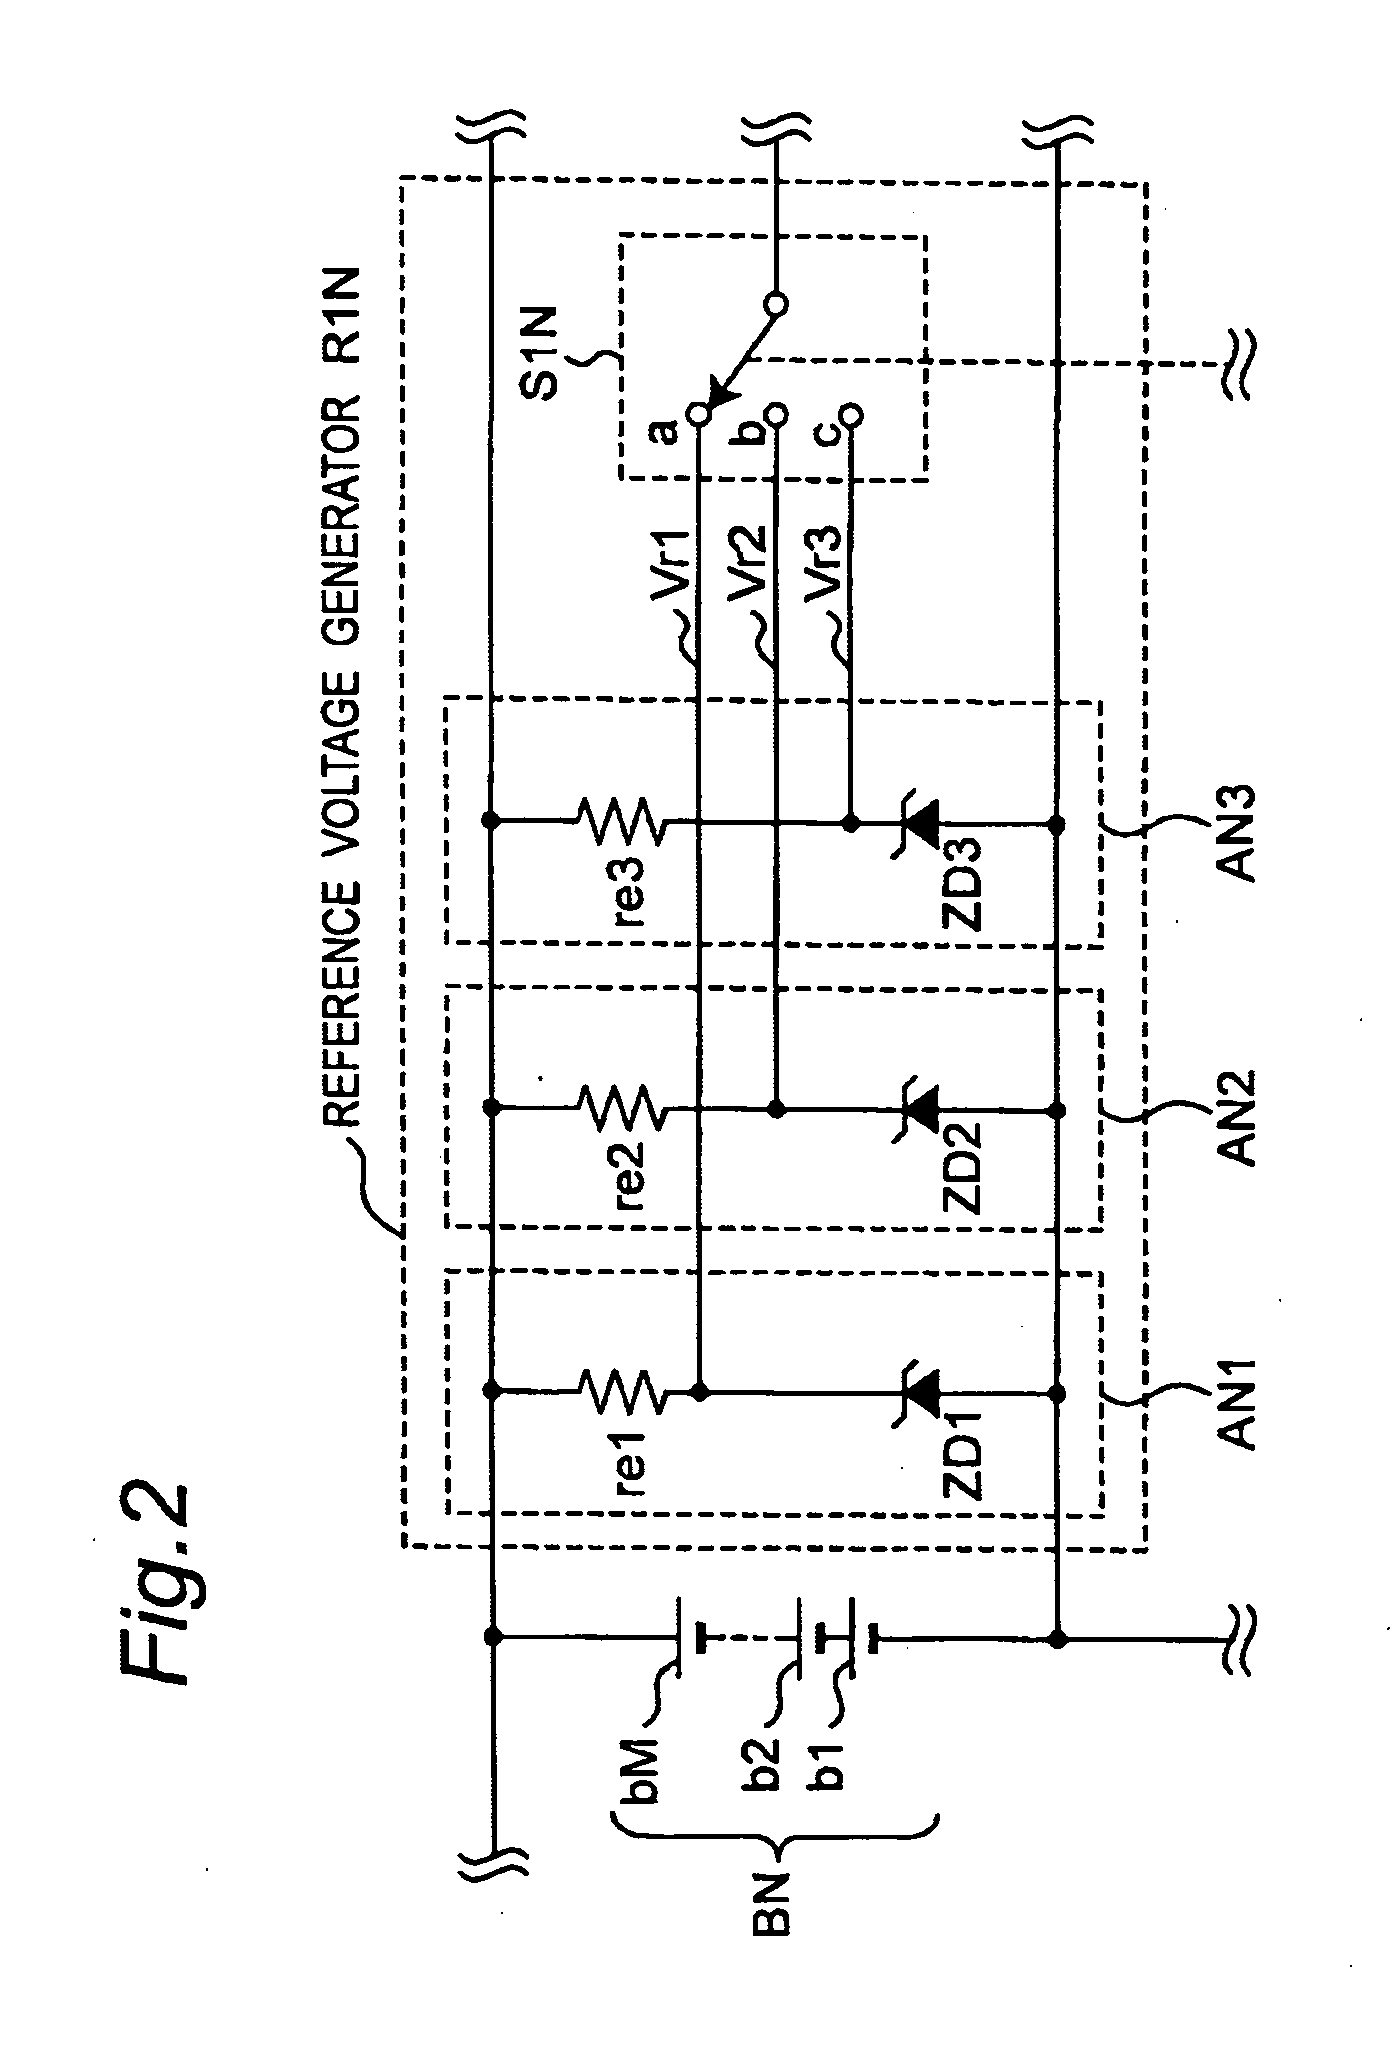 Abnormal voltage detector apparatus for detecting voltage abnormality in assembled battery